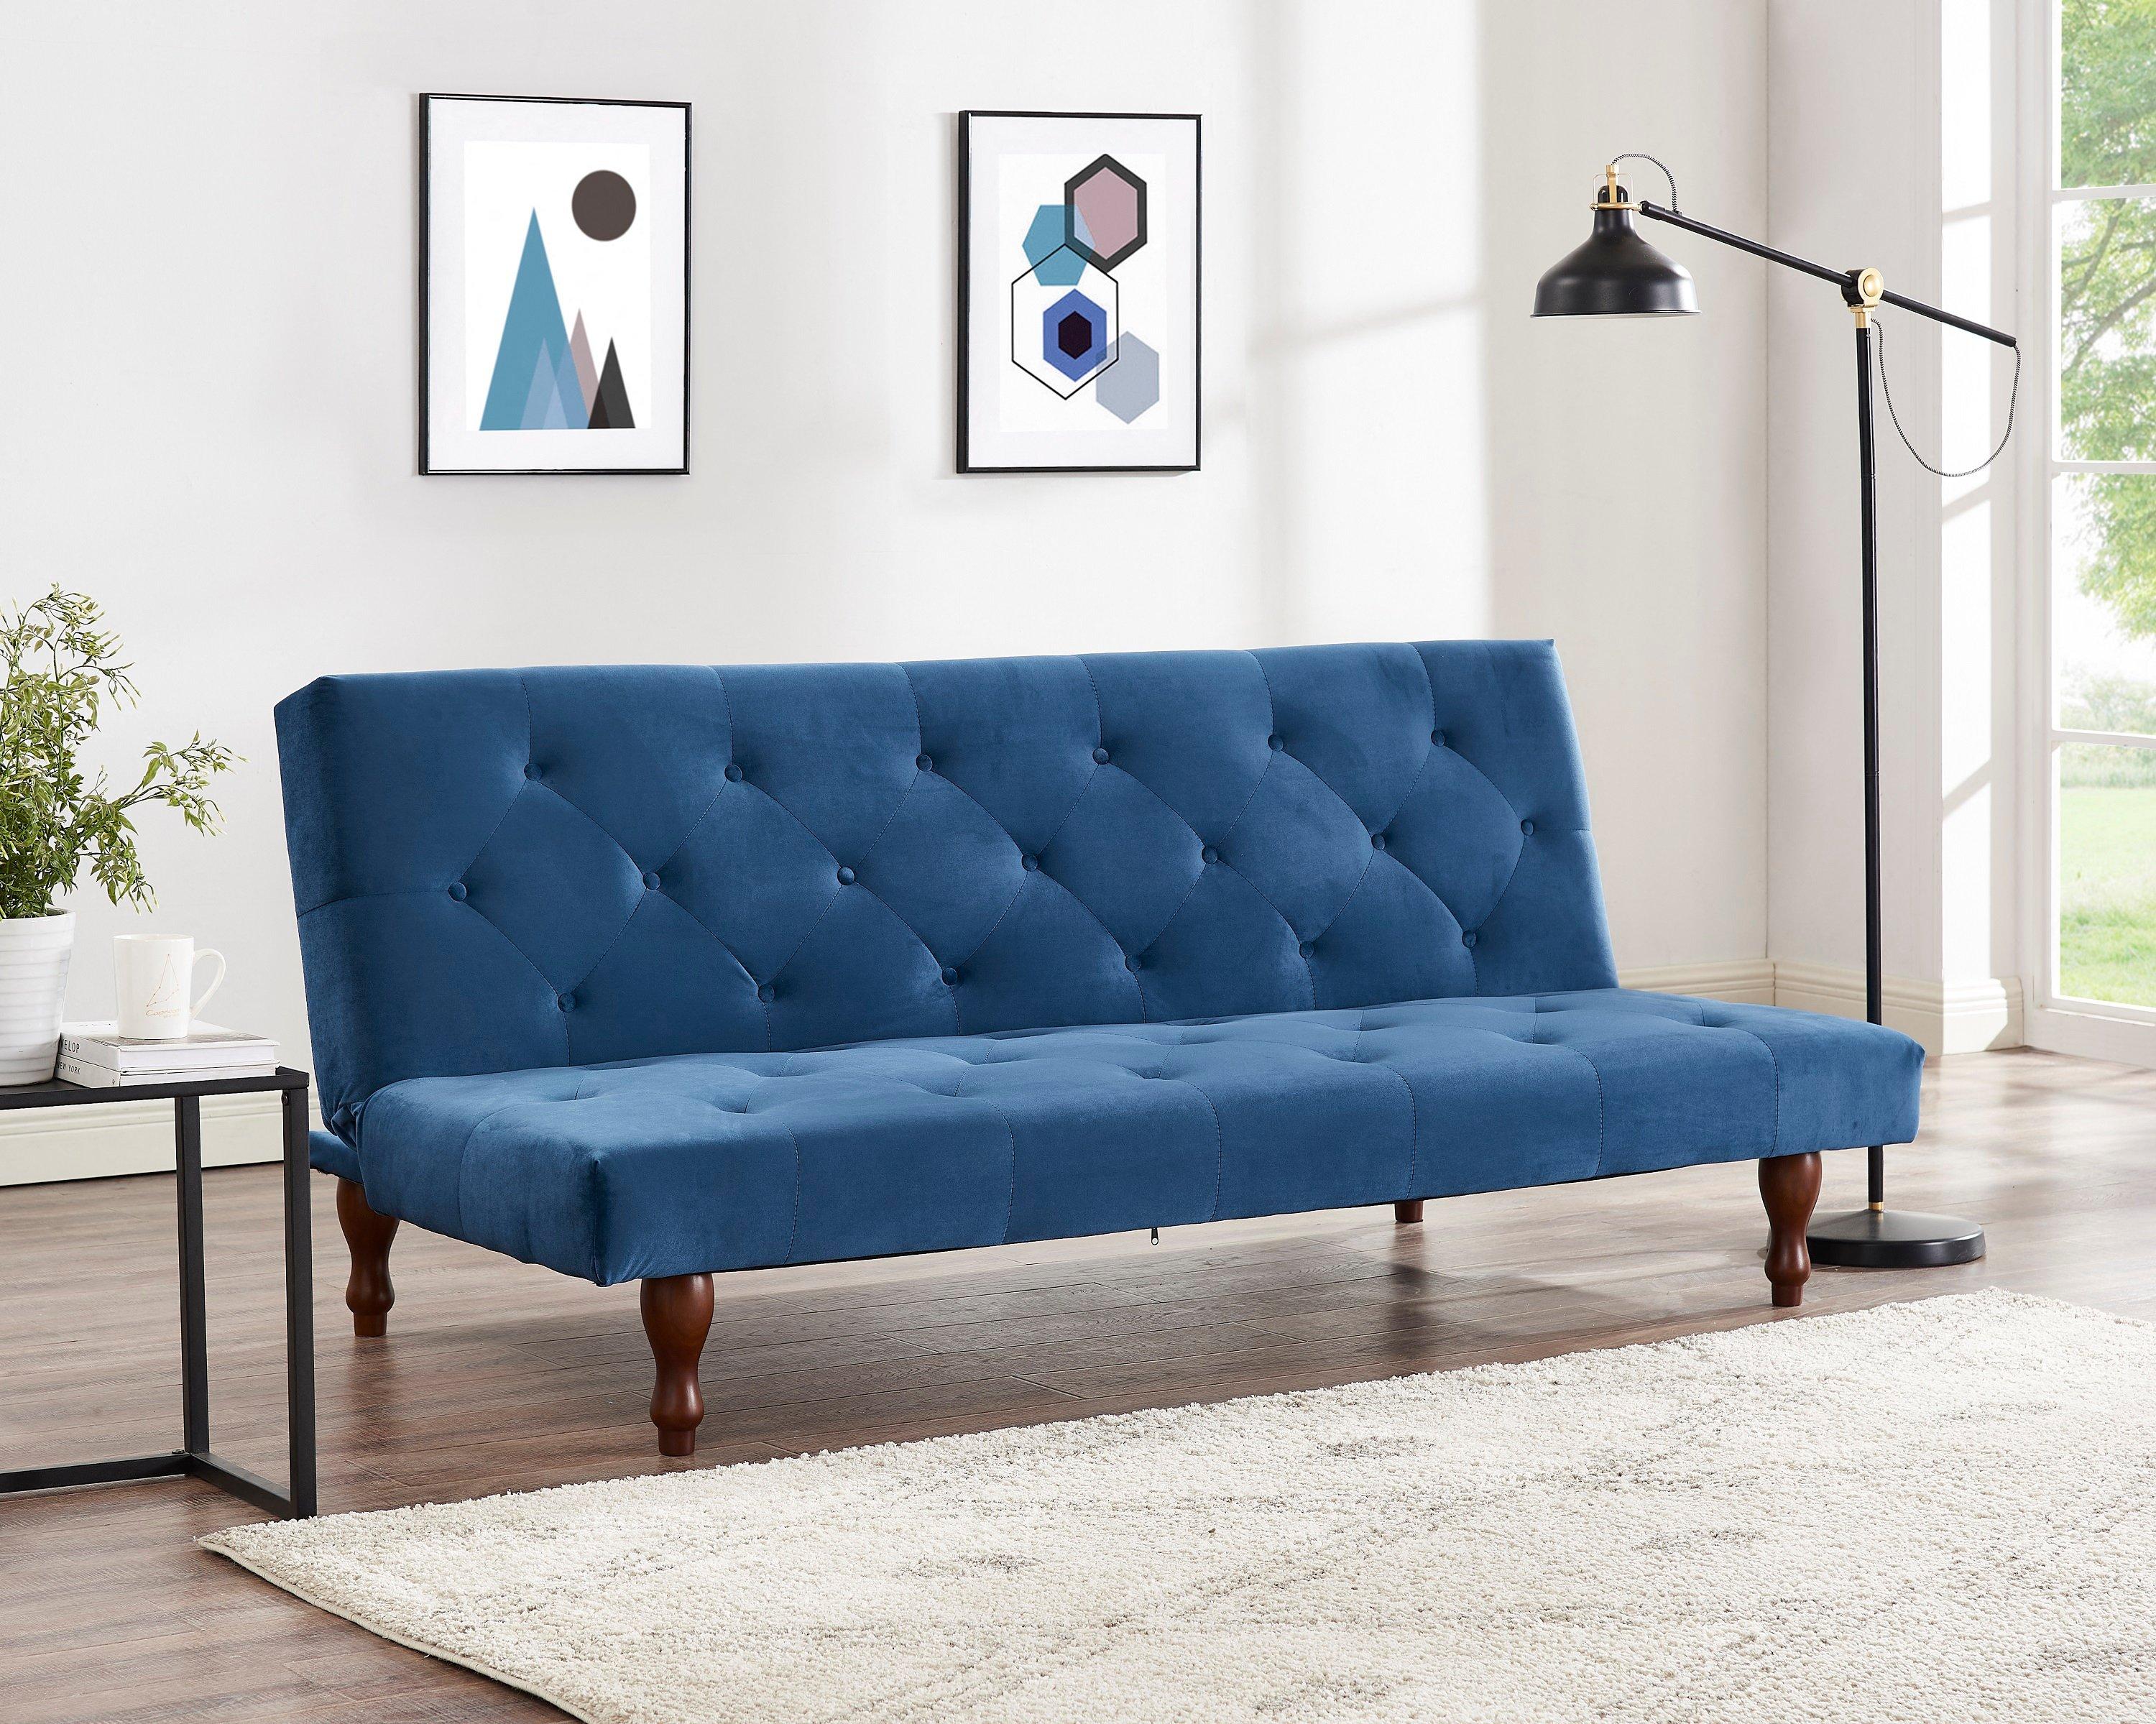 Newell Velvet Sofa Bed With Chesterfield Tufted Detailing and Wooden Legs